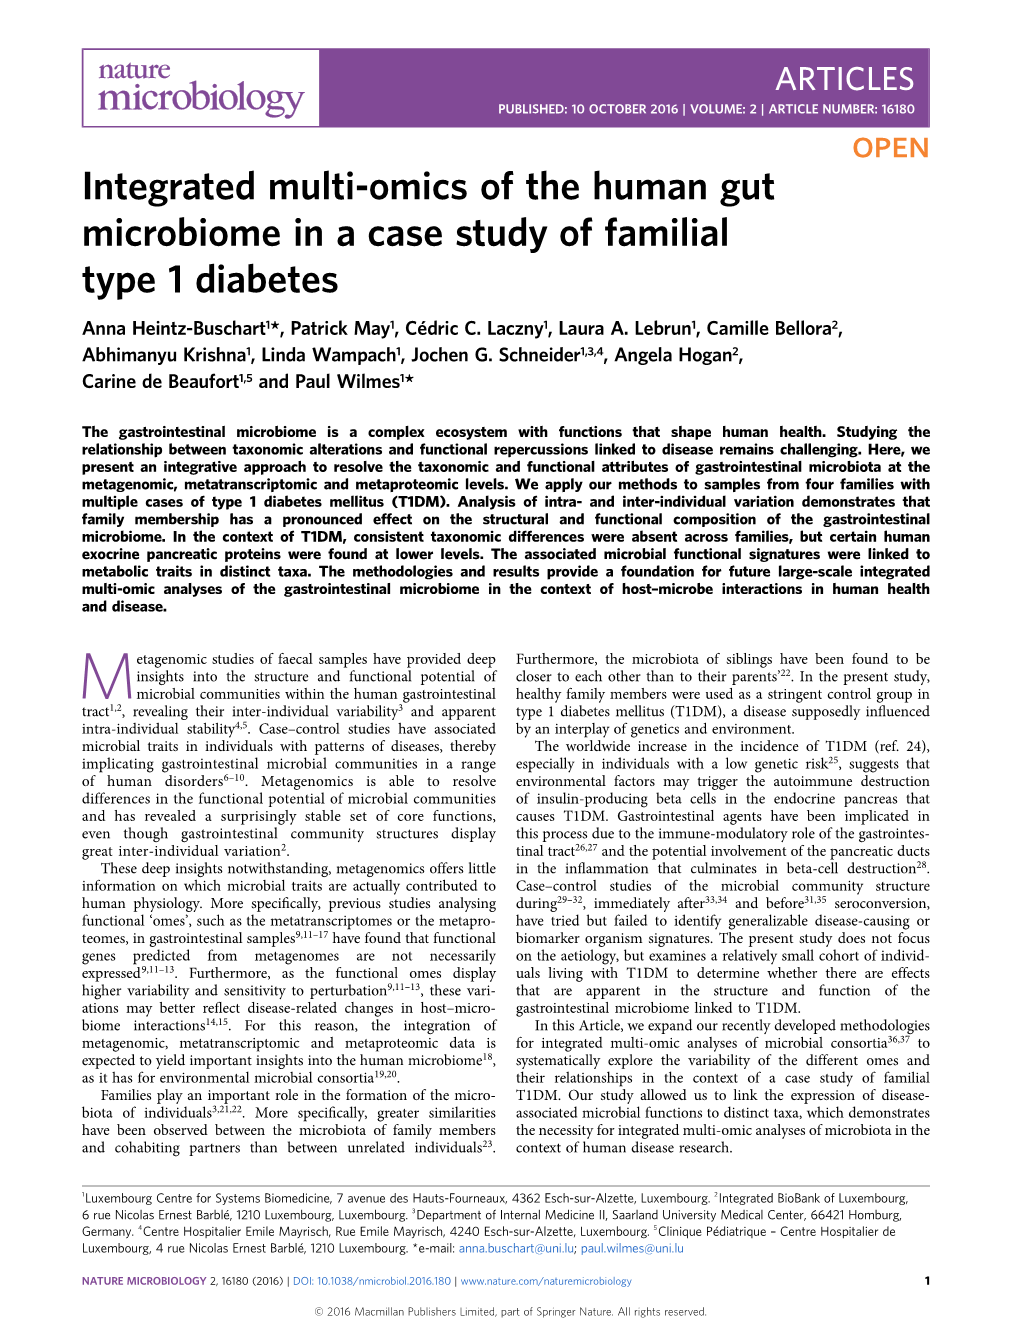 Integrated Multi-Omics of the Human Gut Microbiome in a Case Study Of